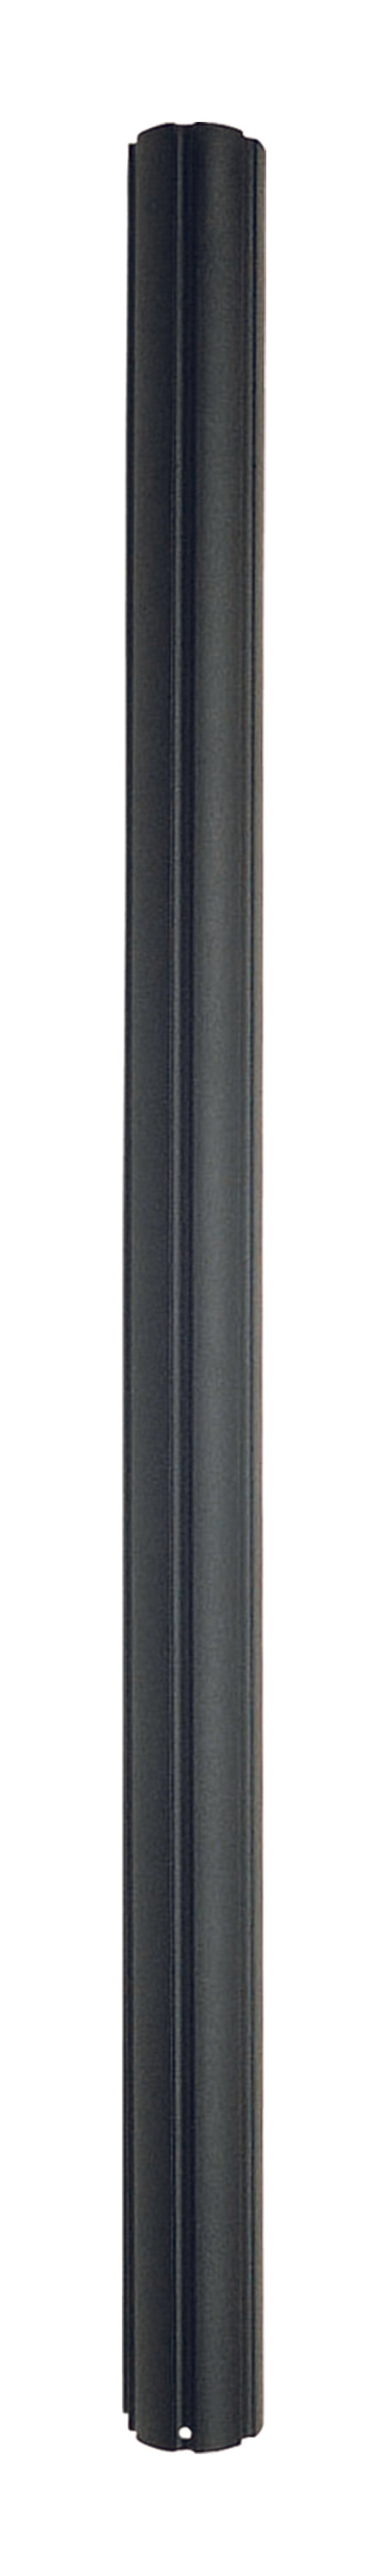 Maxim 84" Burial Pole with Photo Cell